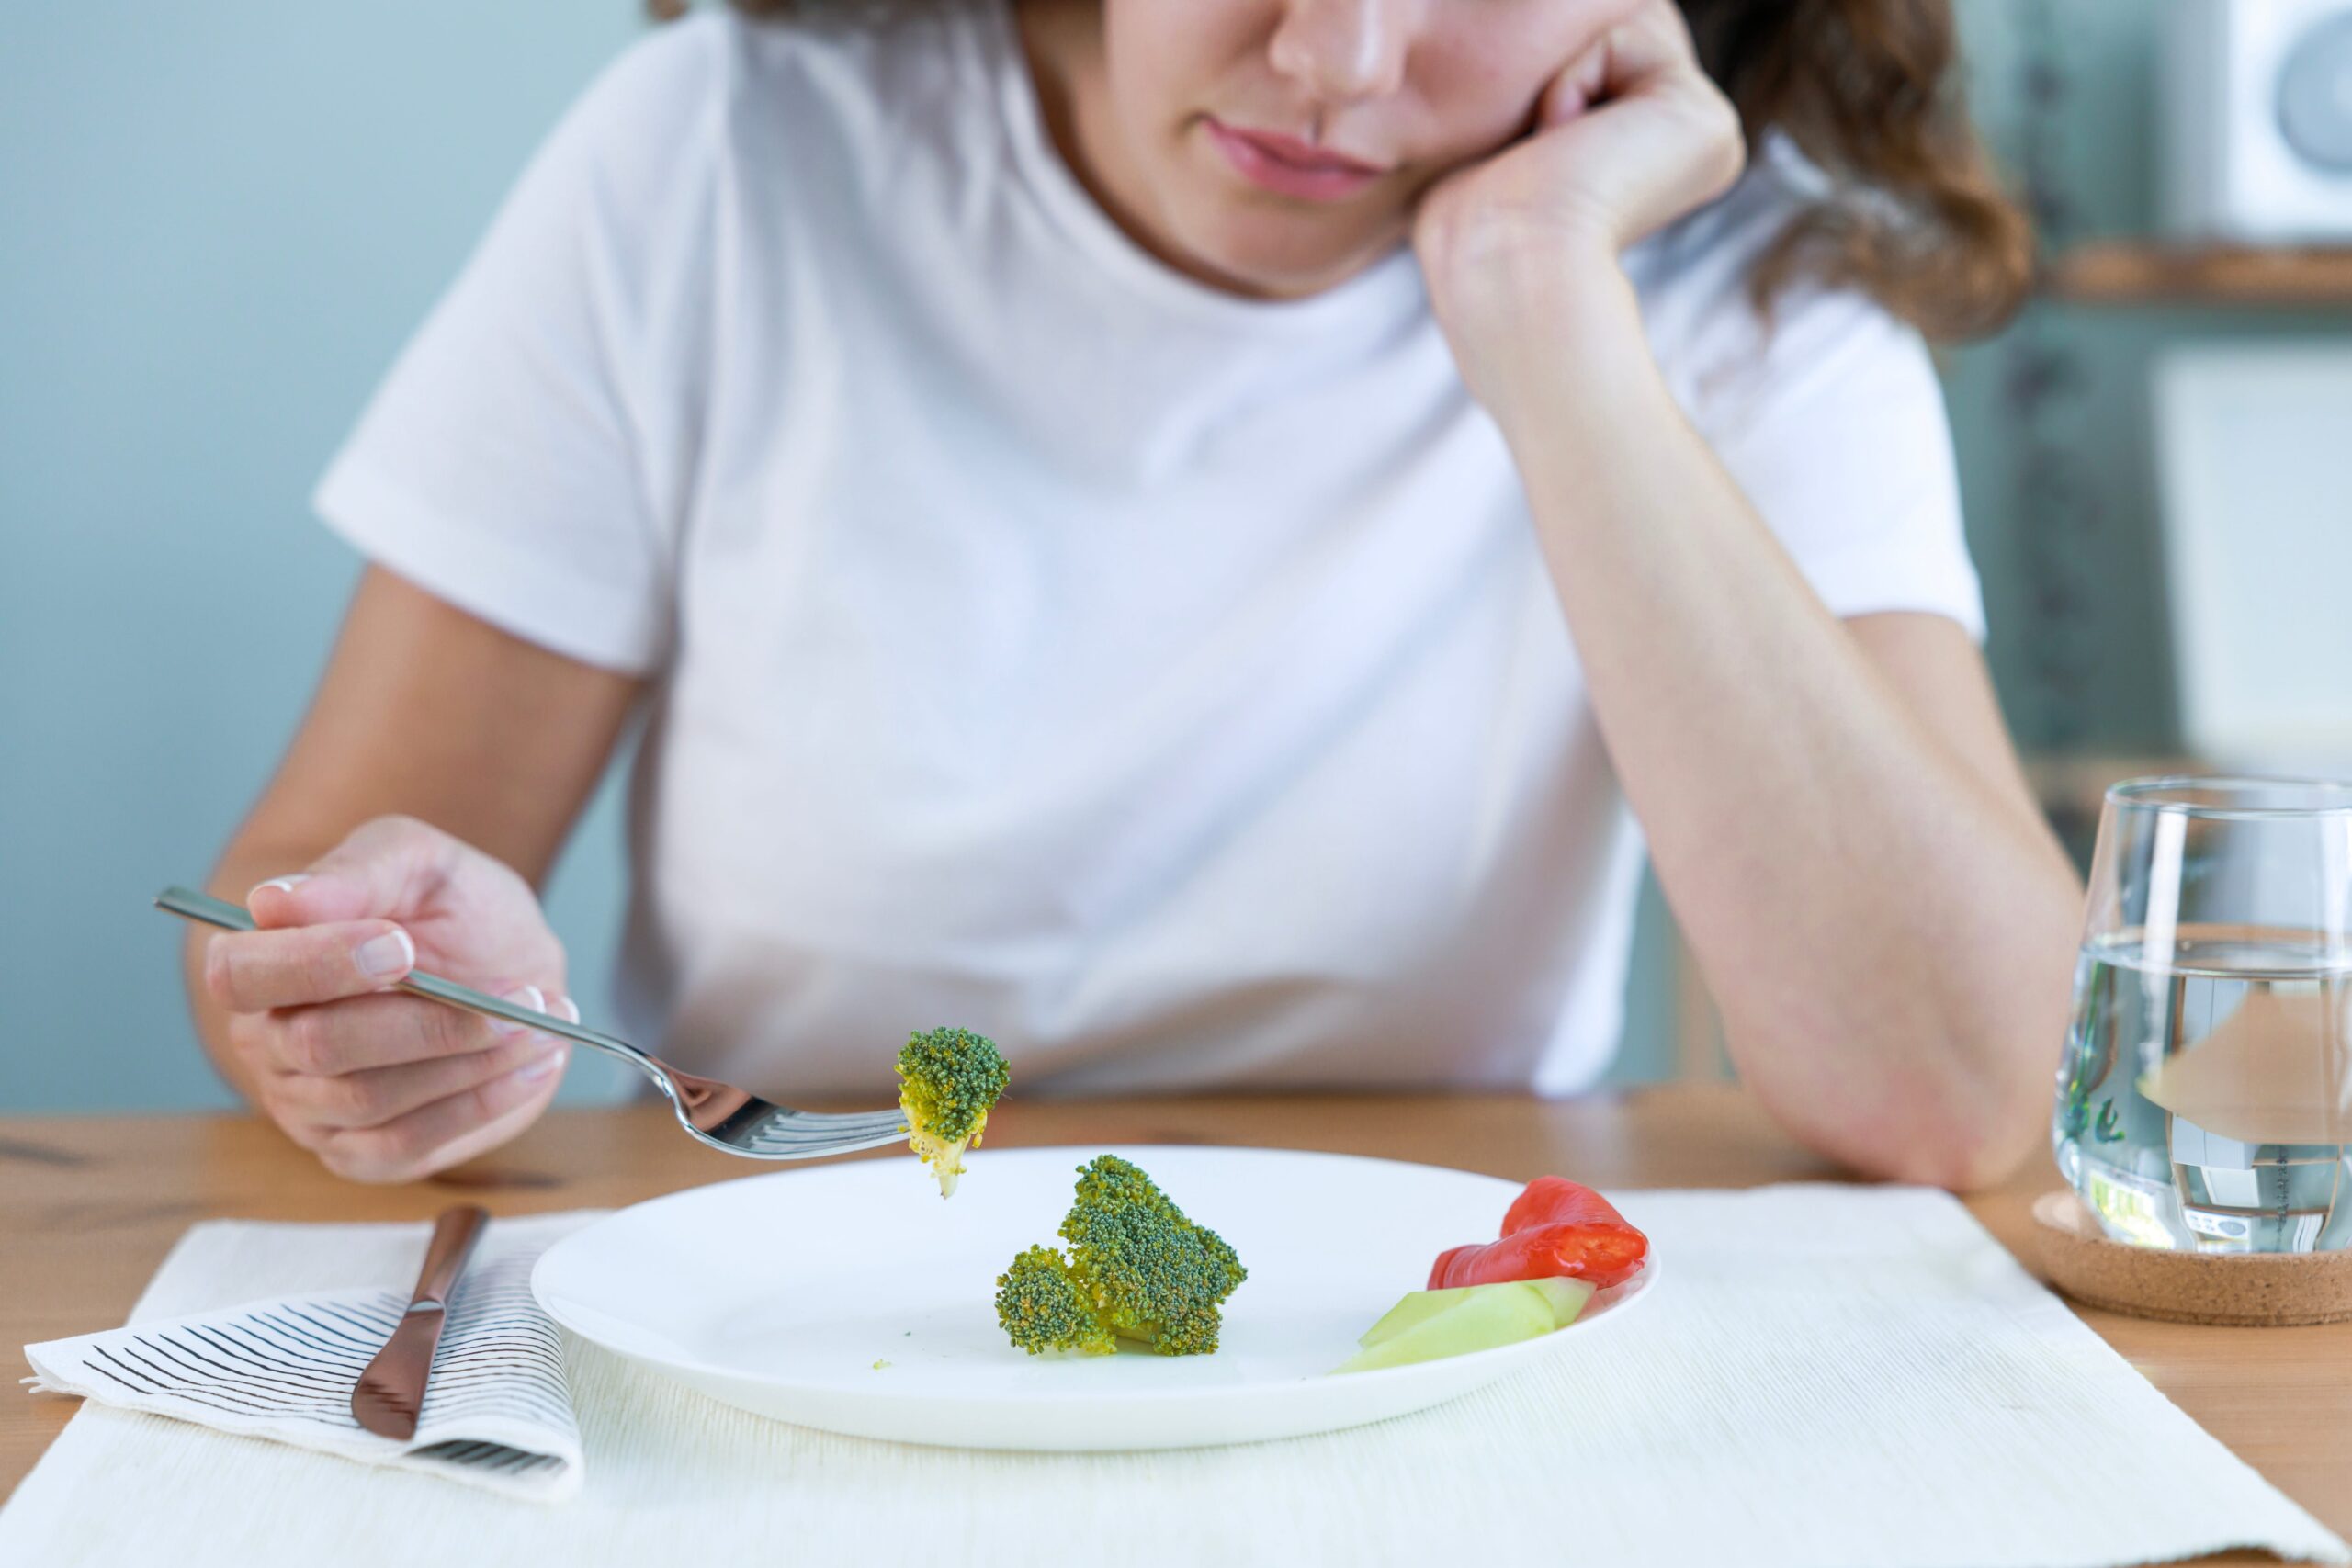 The Link Between Trauma and Eating Disorders